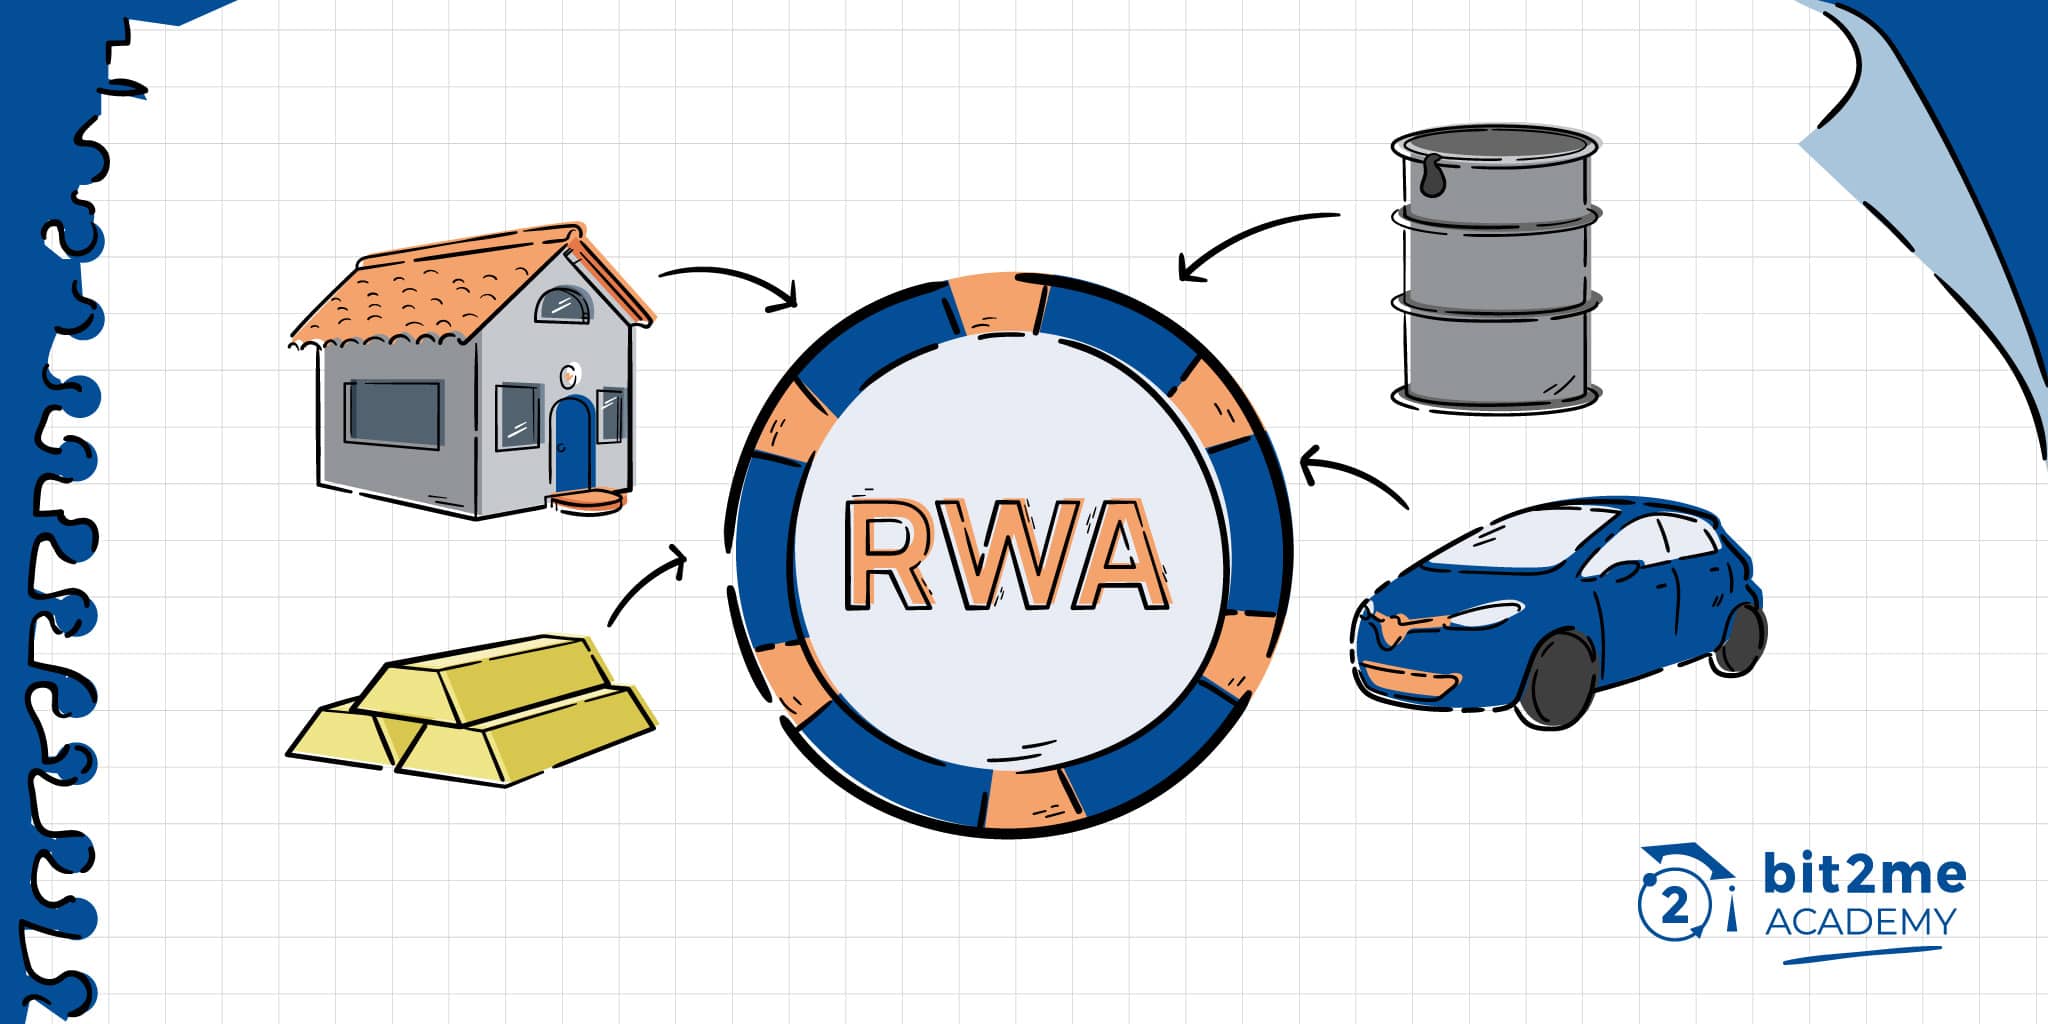 What are Real World Assets or RWA?